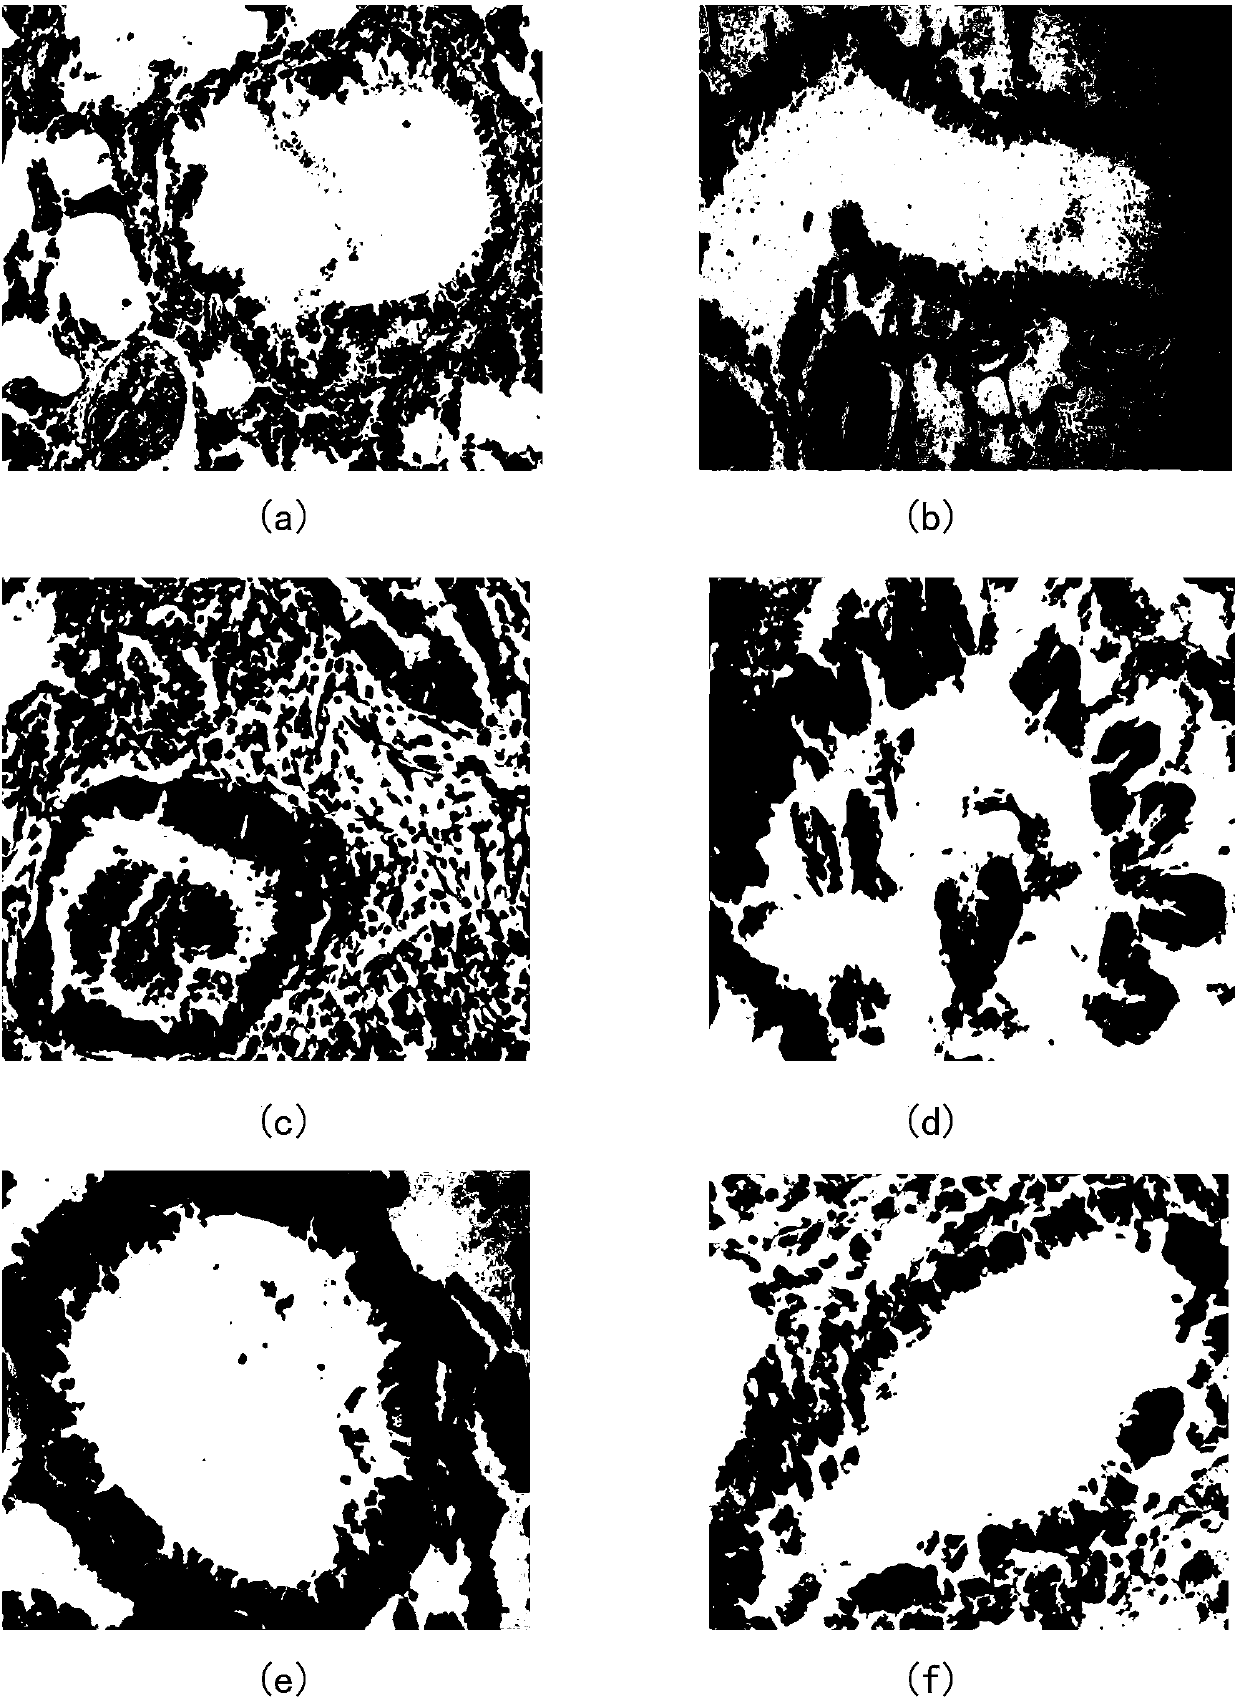 Rat model with symptom of cold fluid retention in lung of bronchial asthma and construction method of rat model